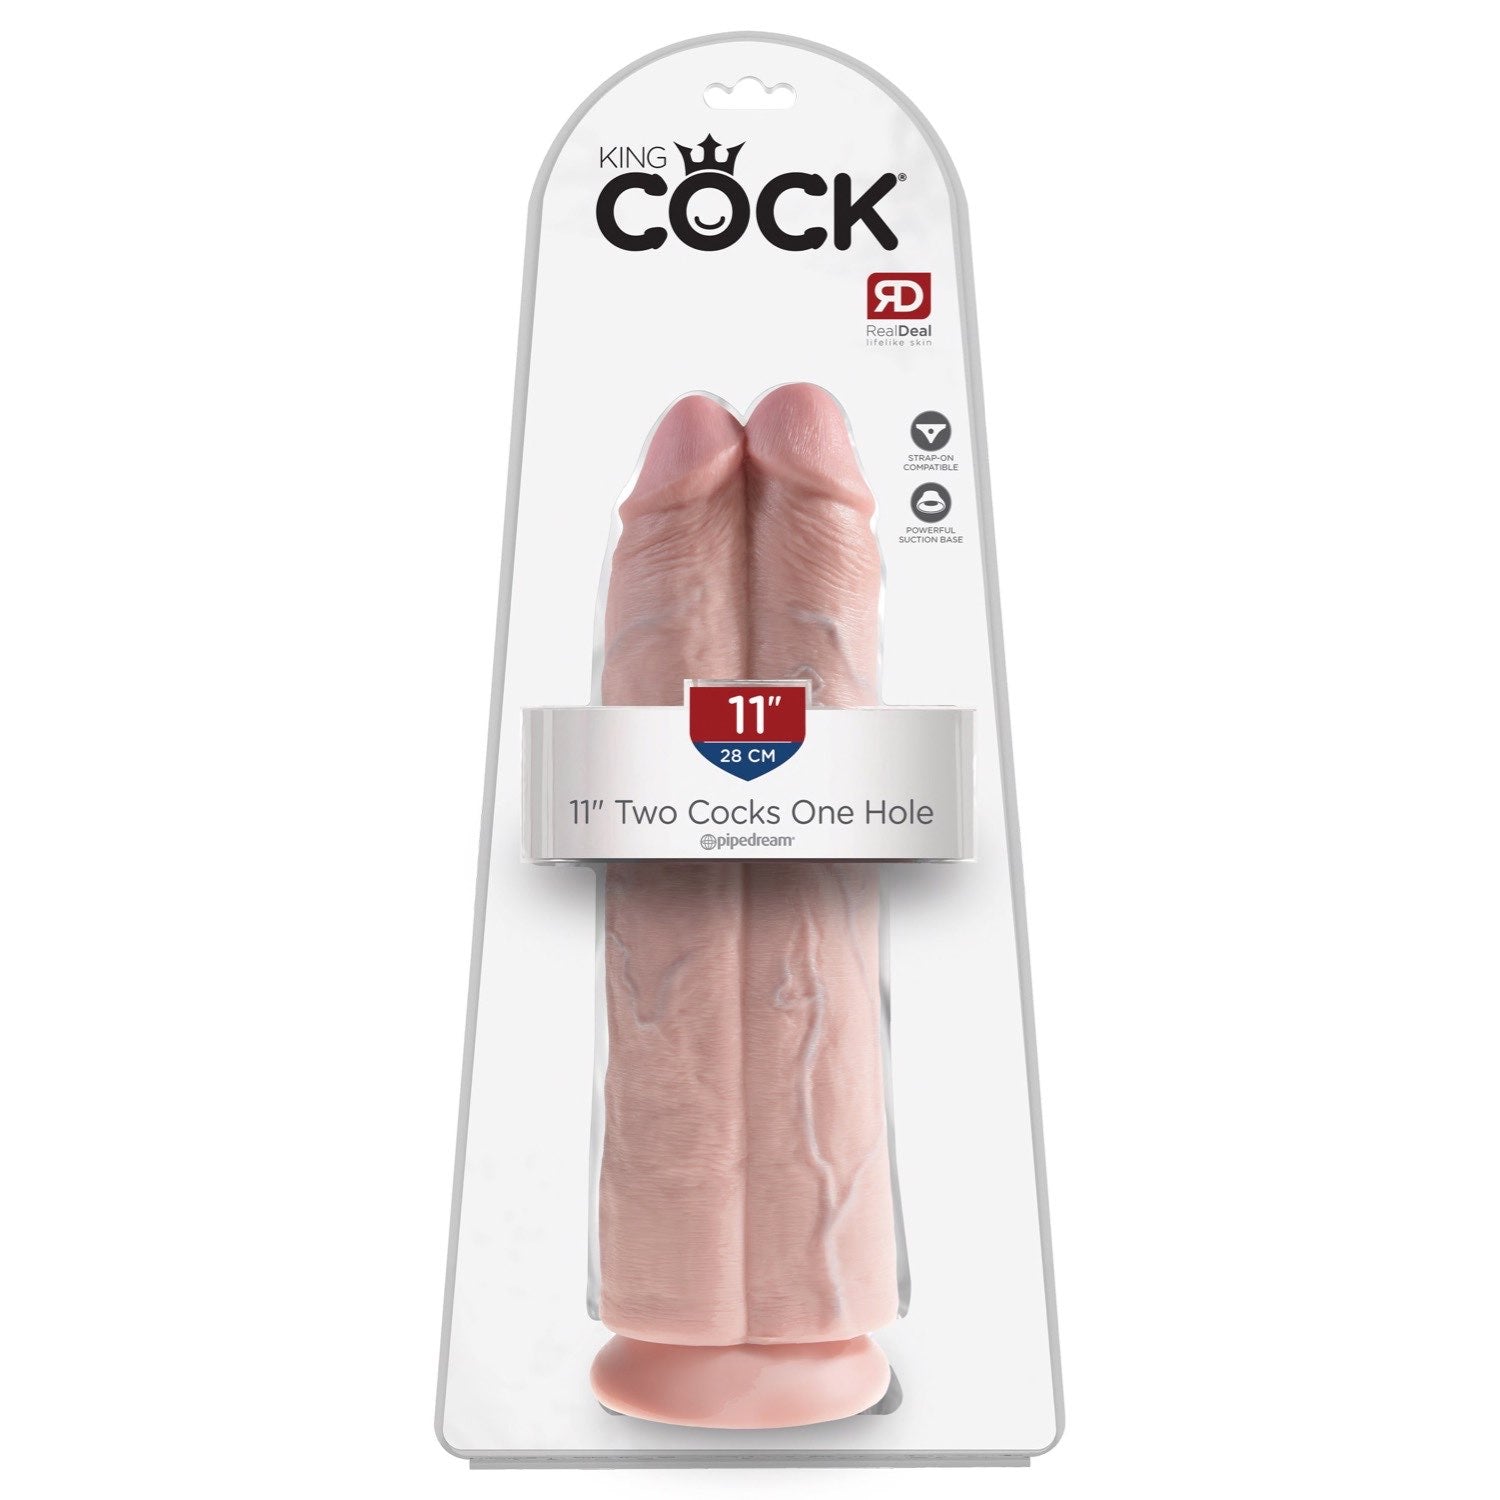 King Cock 11&quot; Two Cocks One Hole - Flesh 28 cm Dong by Pipedream